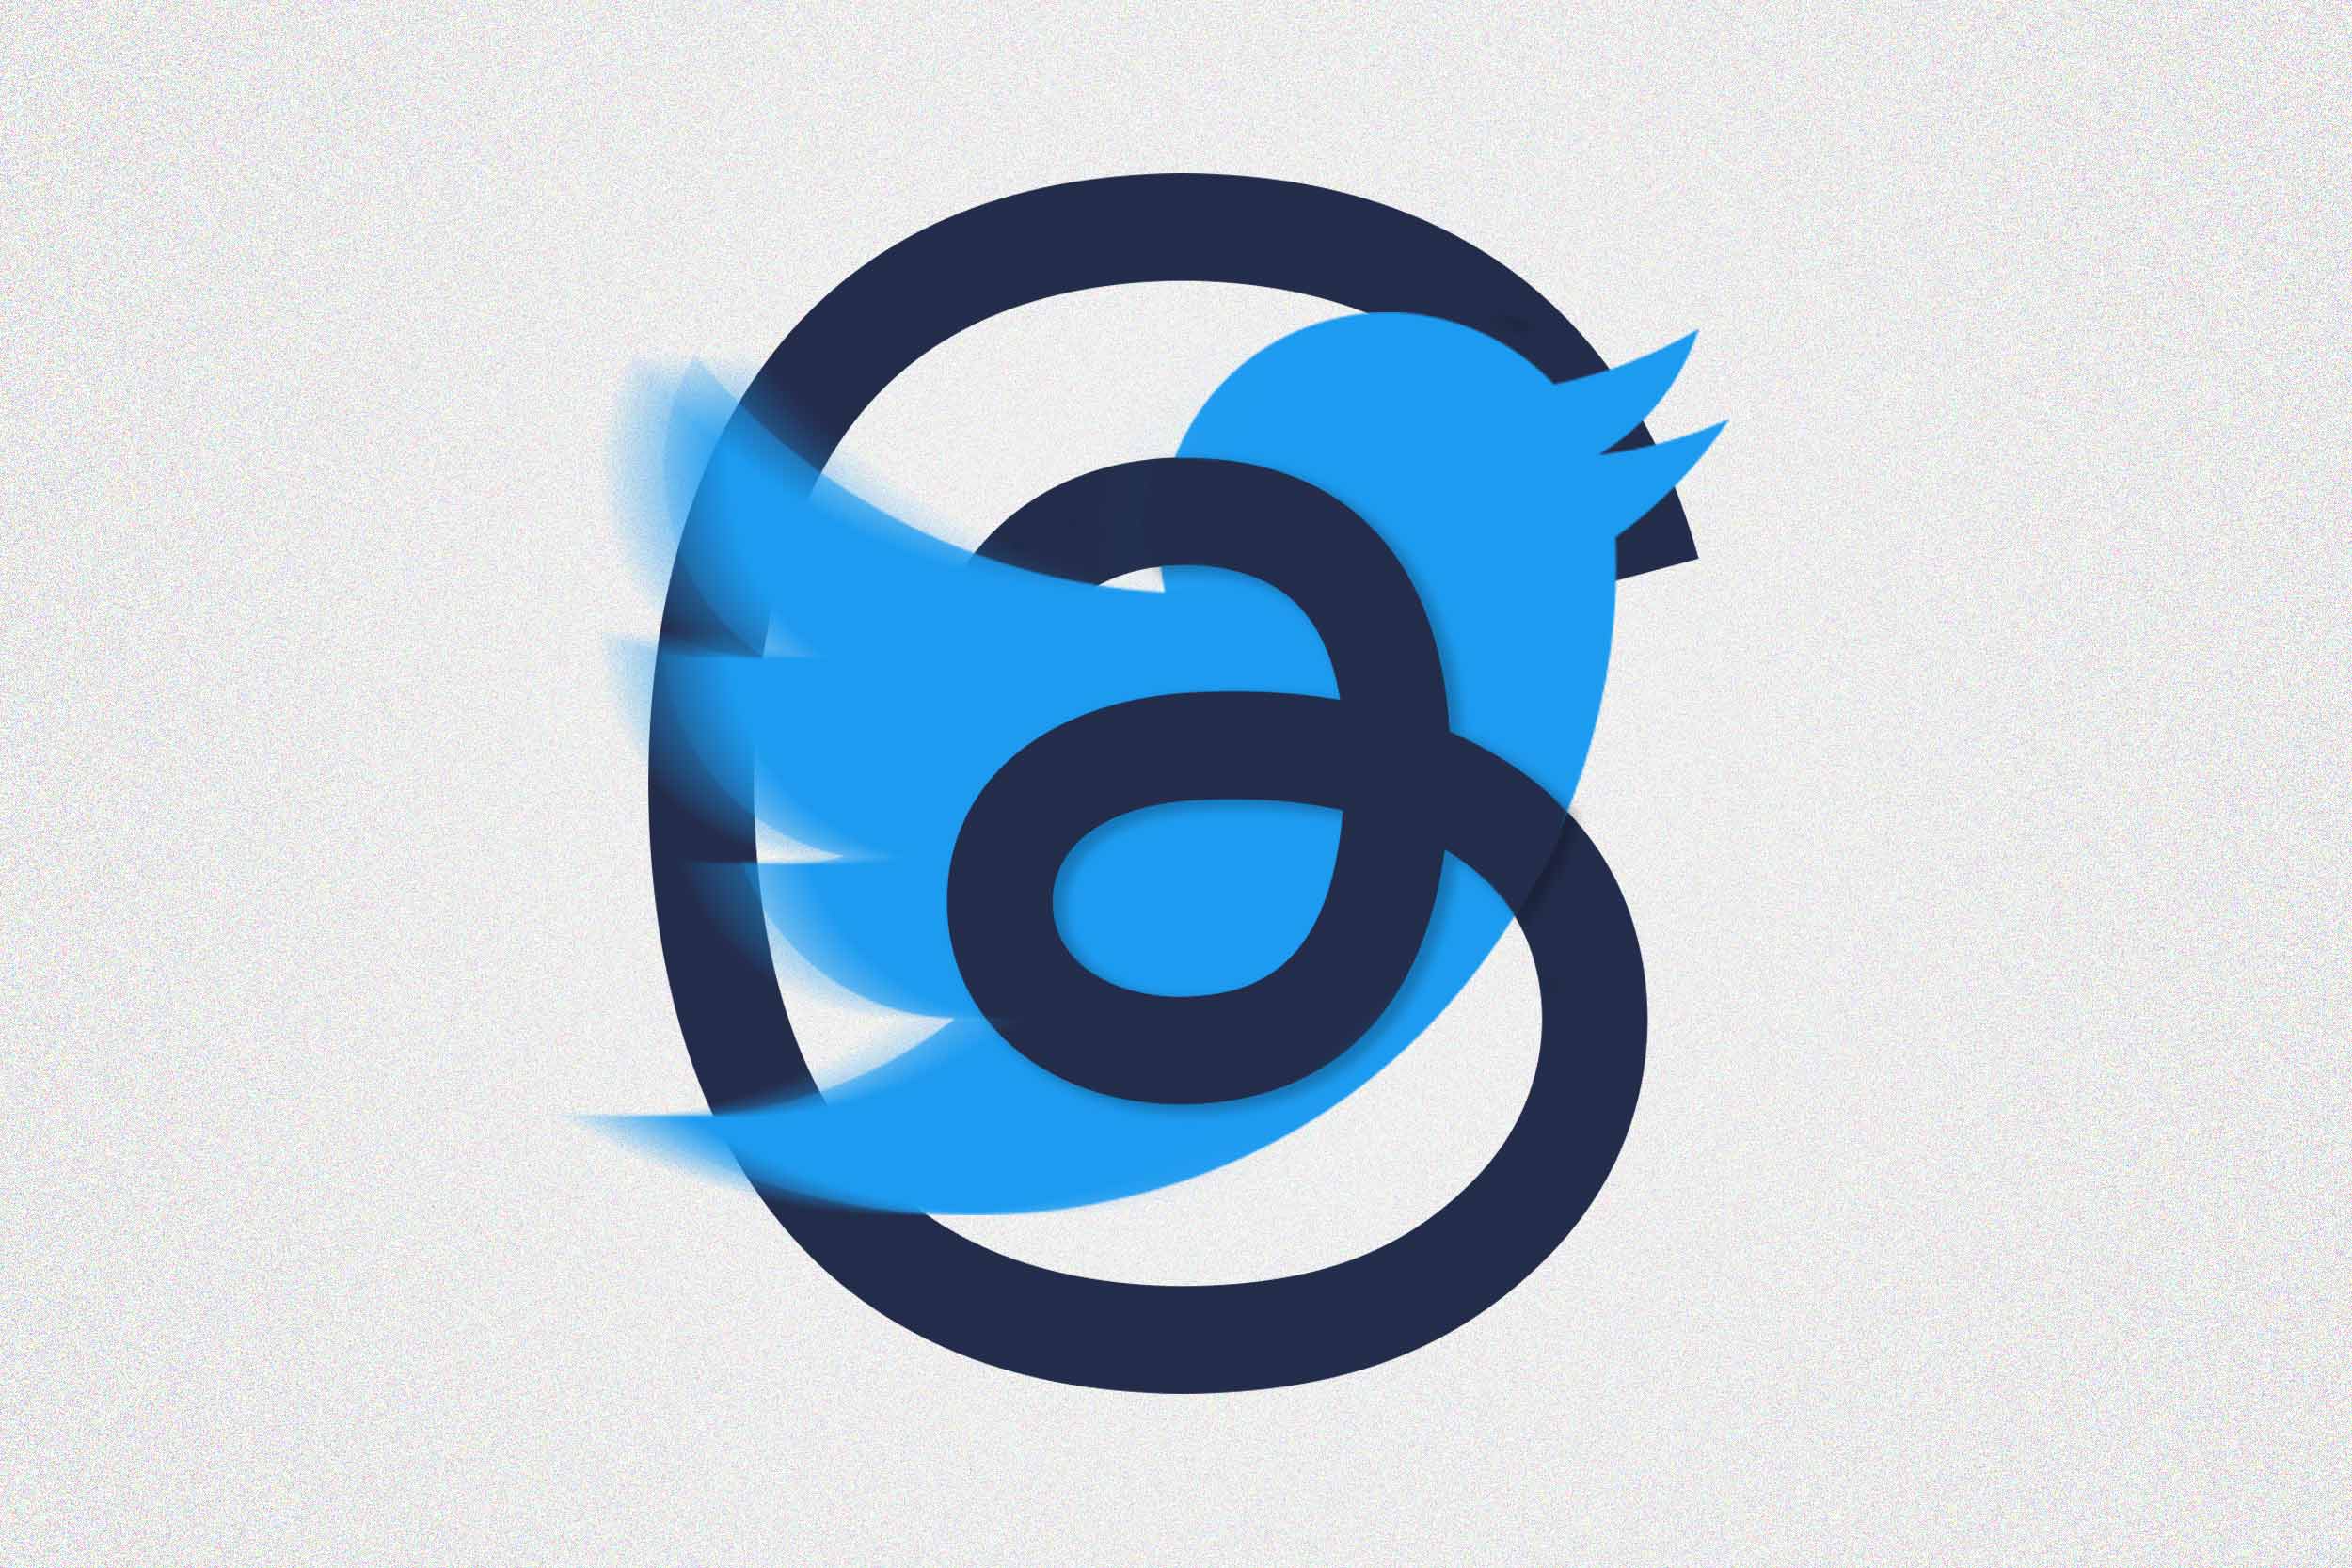 Illustration of the Twitter bird icon wrapped in the Threads icon